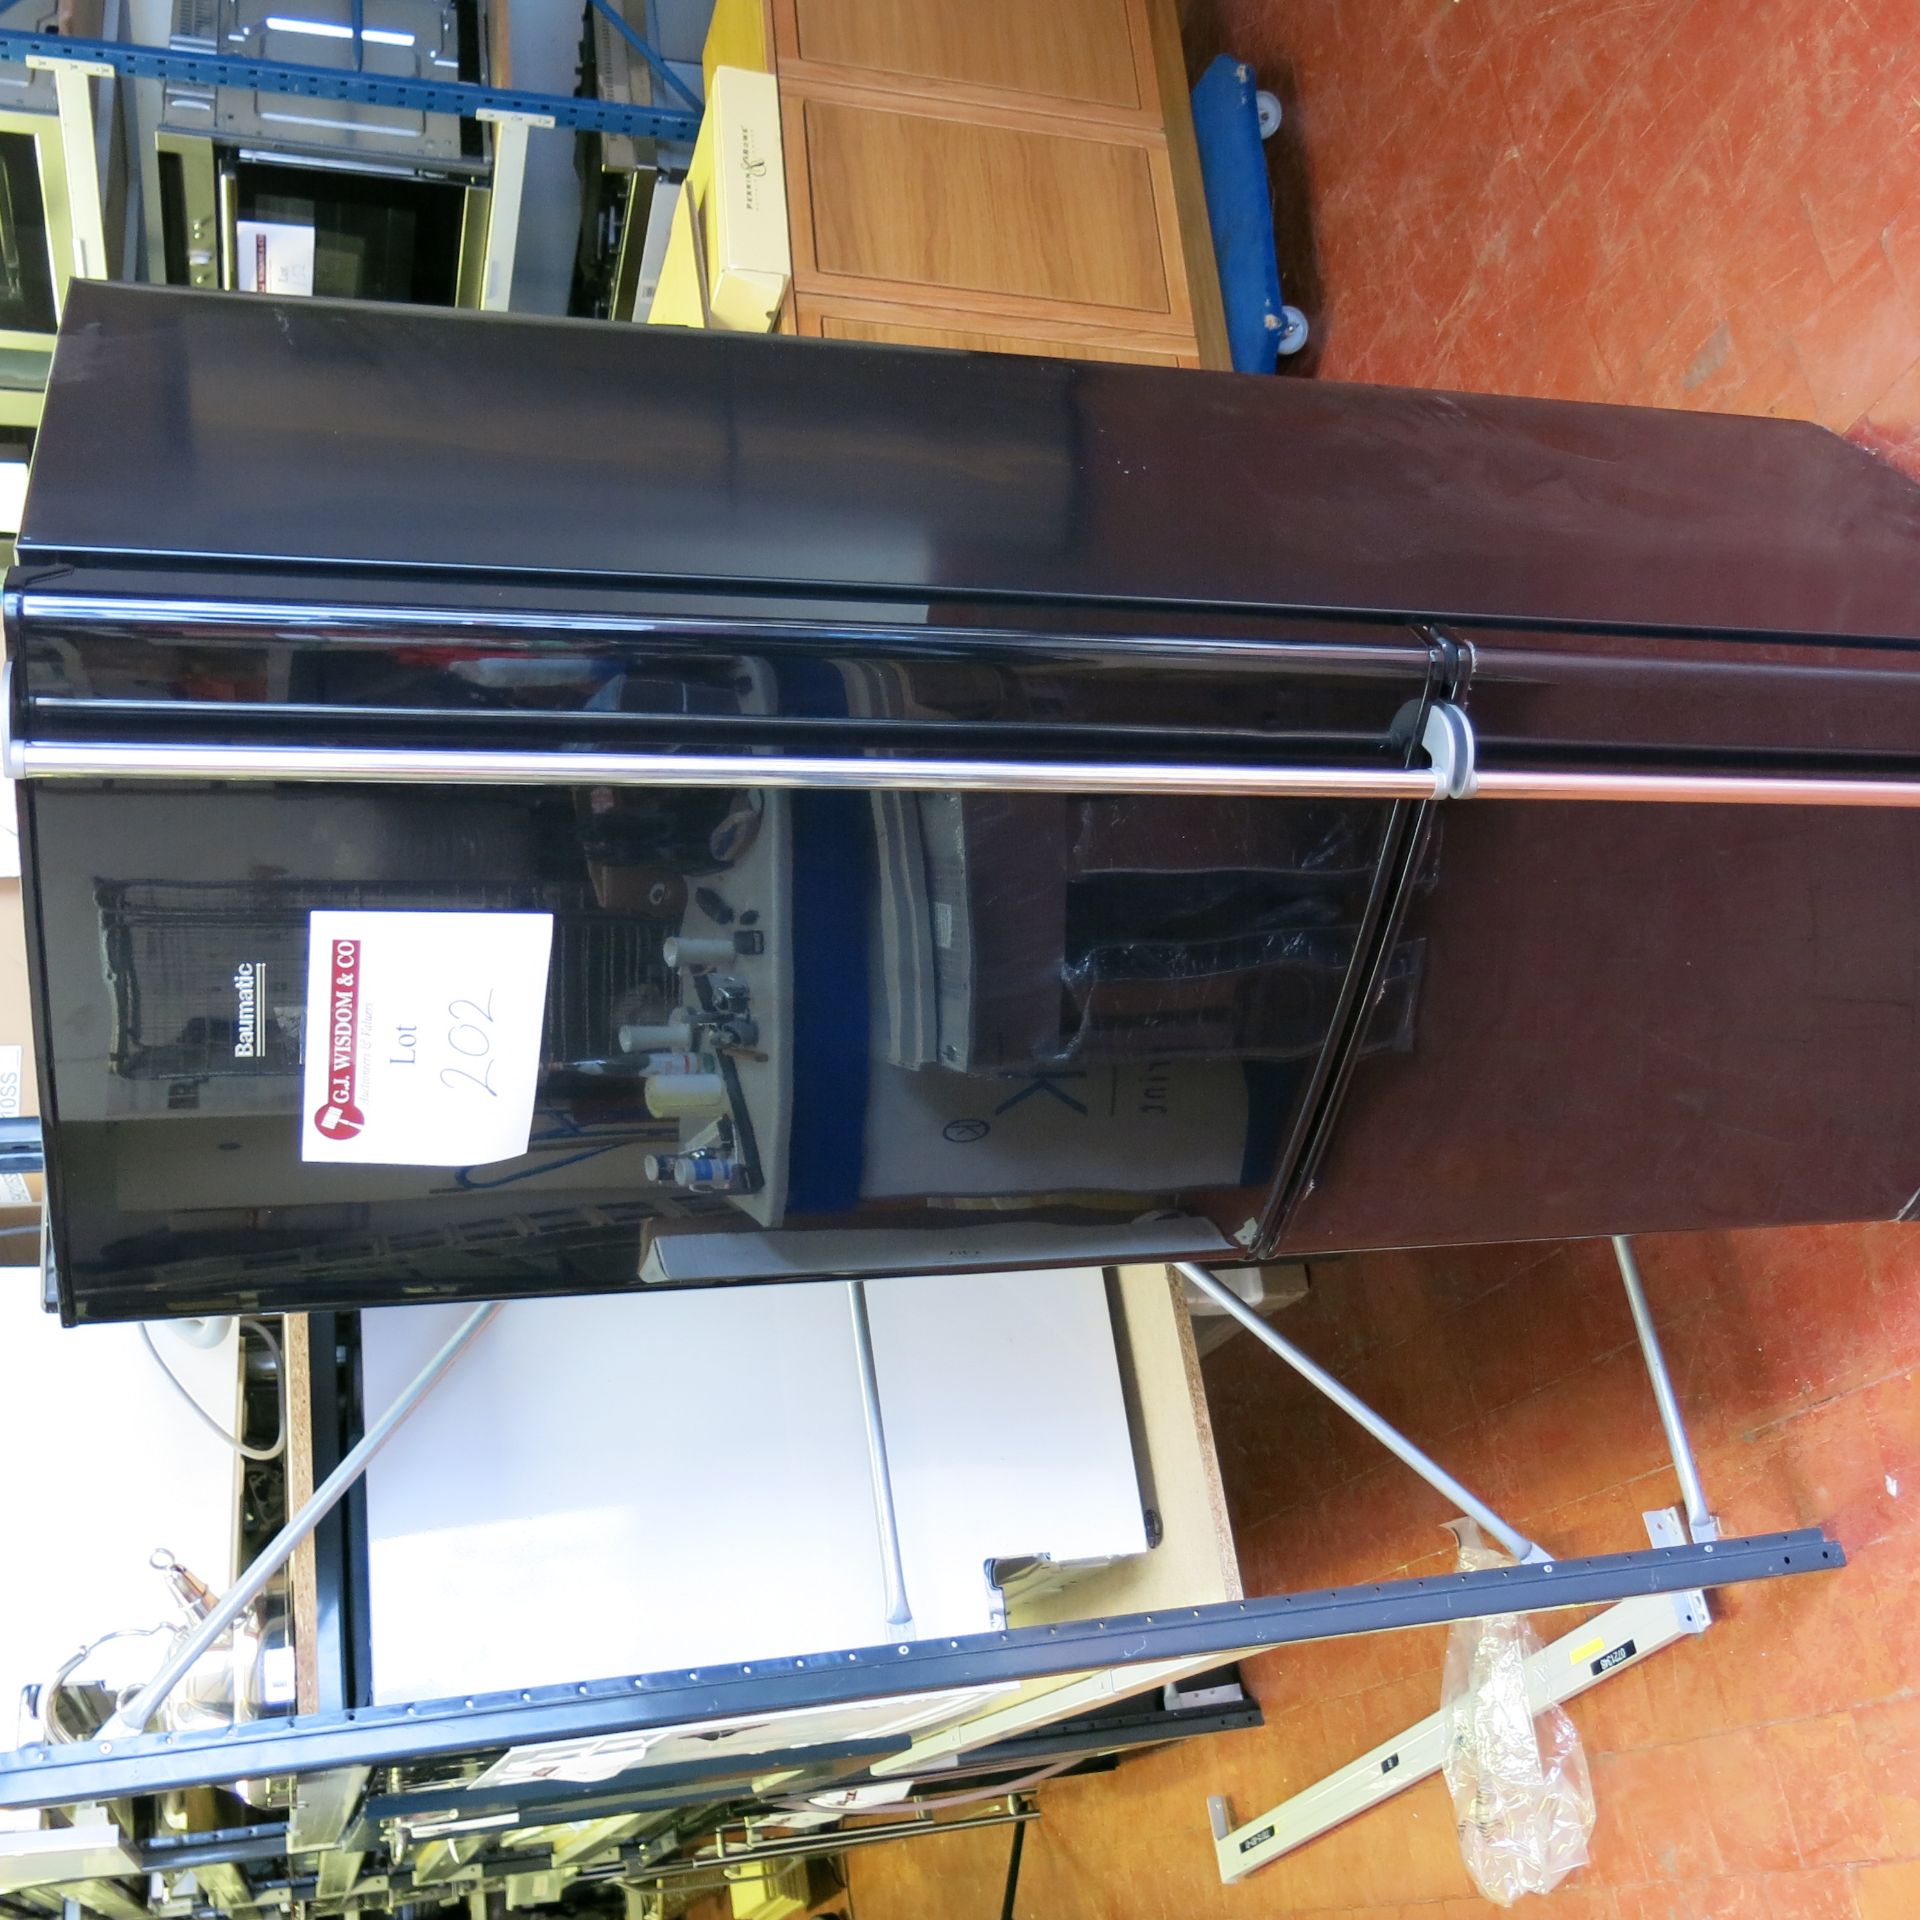 Baumatic Fridge/Freezer In Black, Model BF340BL. Size (H) 175cm. Comes with Instruction Manual. Ex